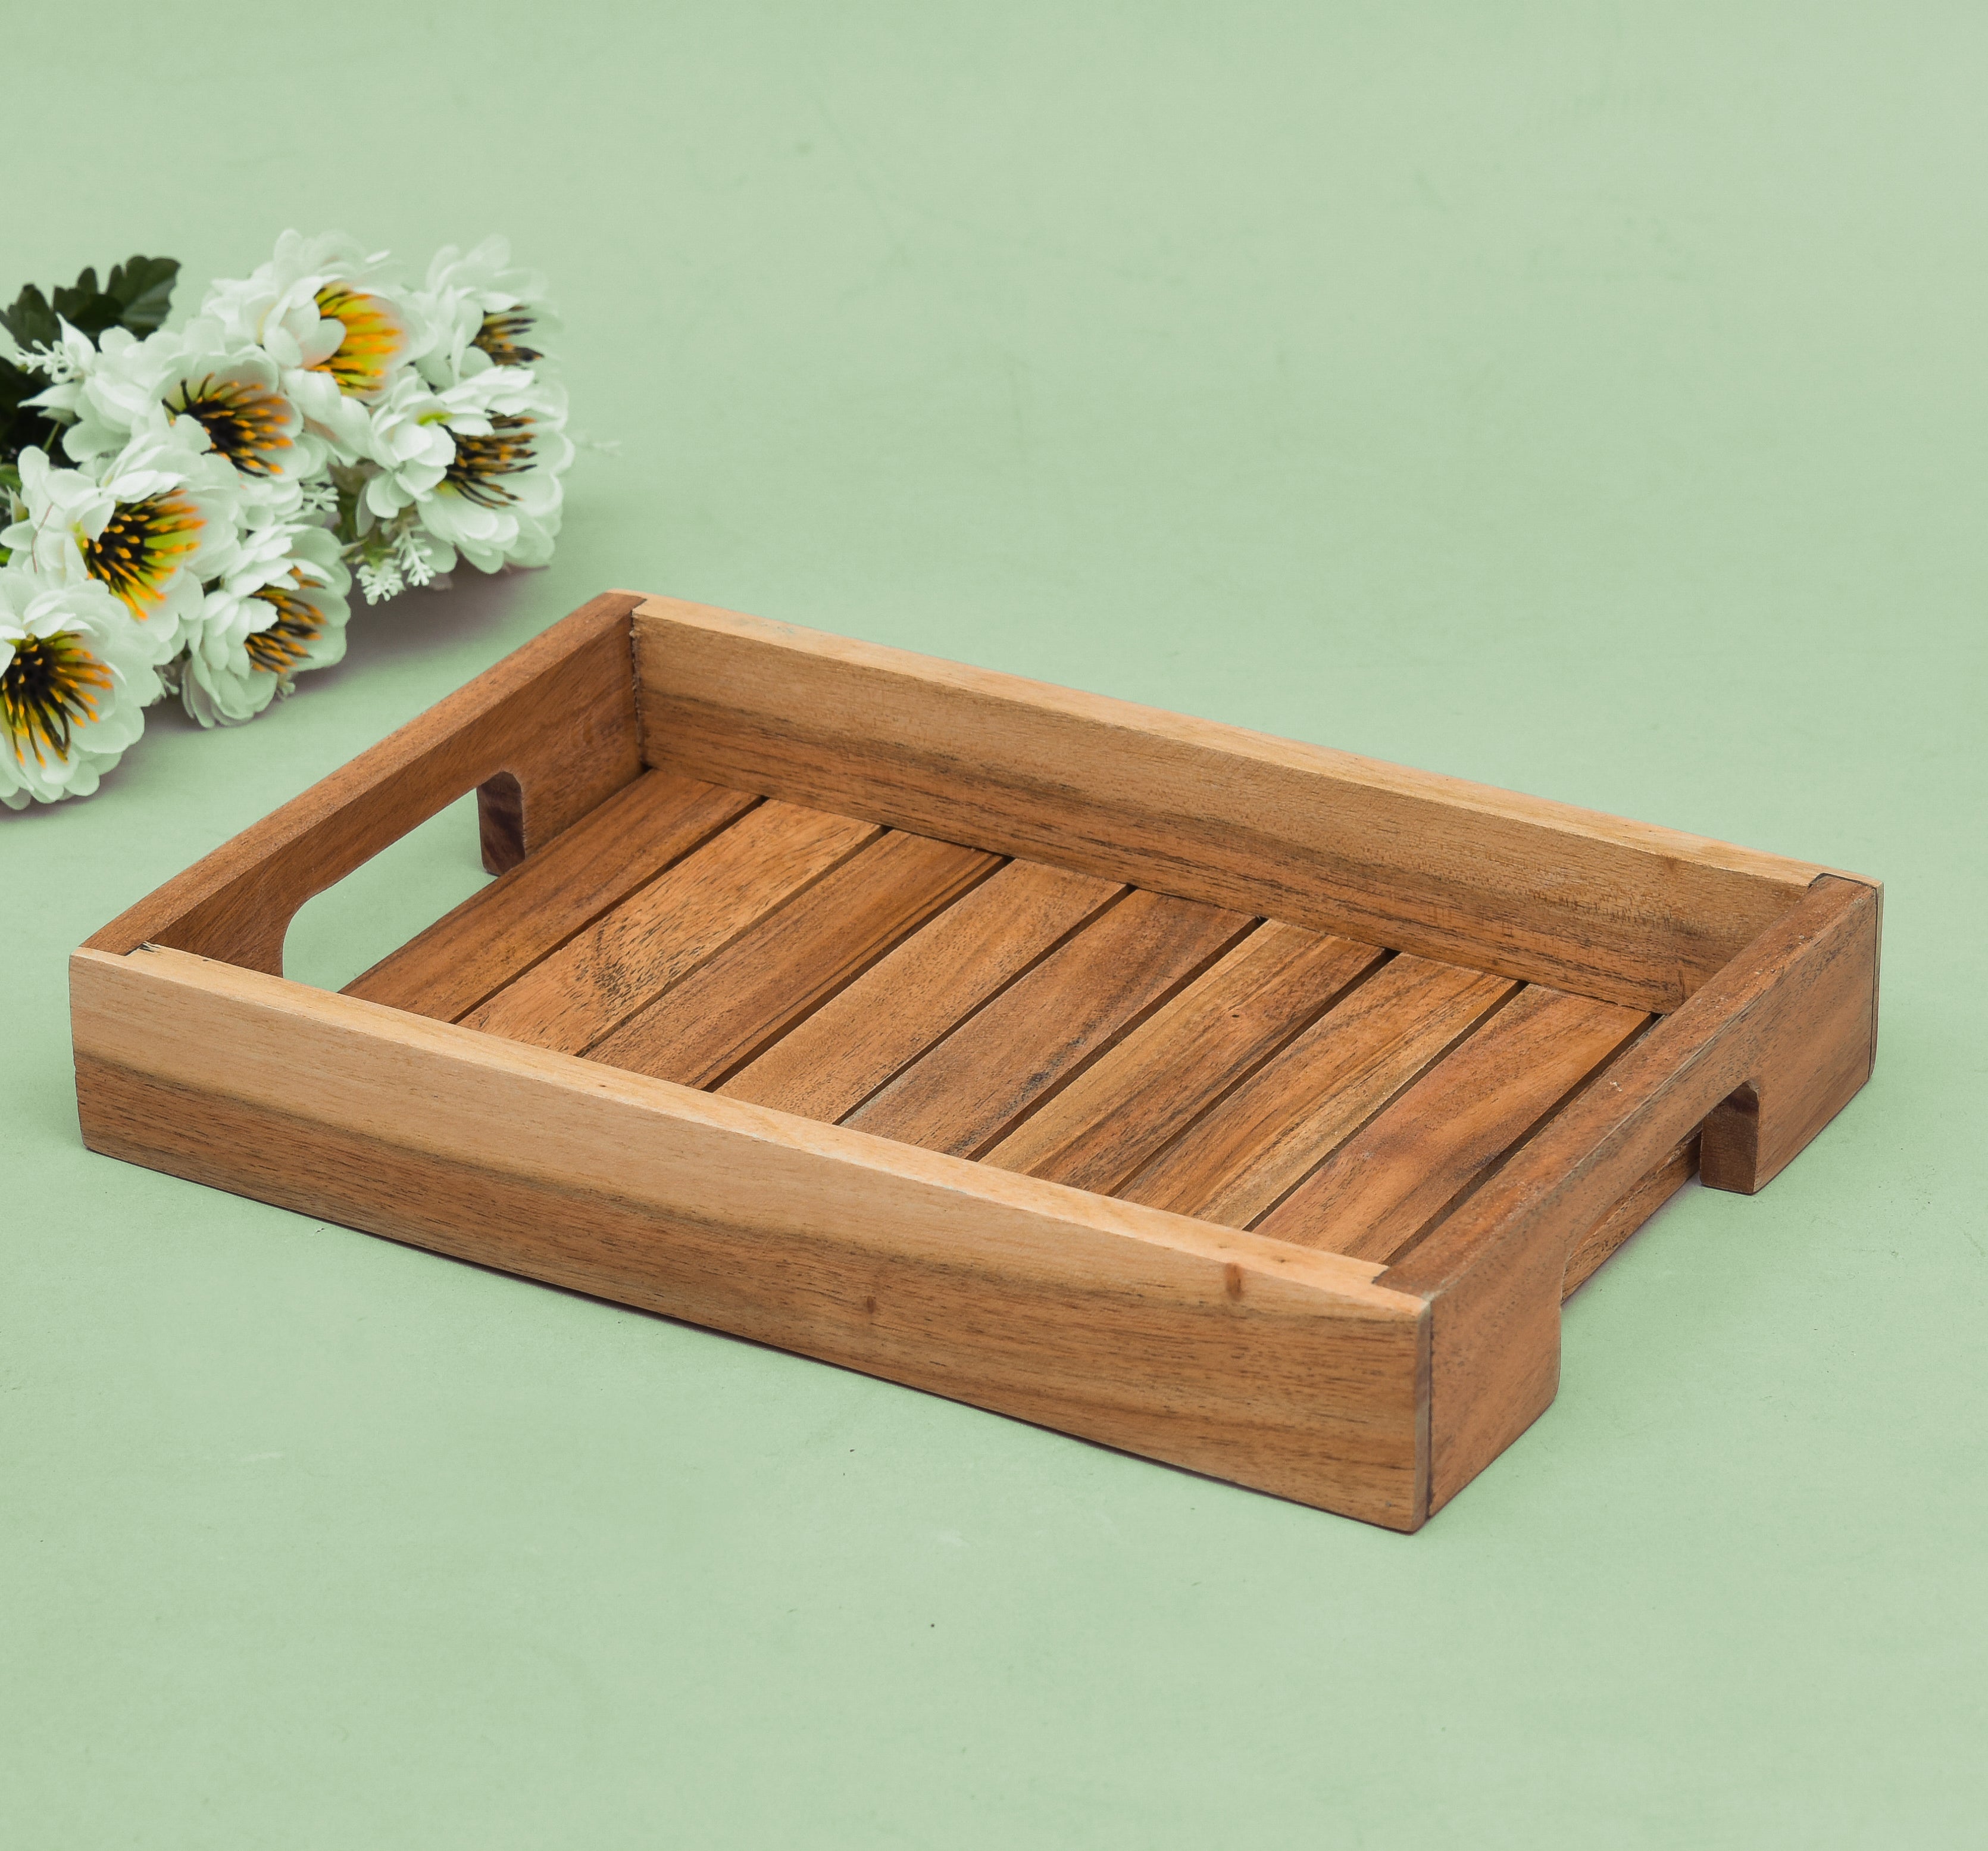 ACACIA WOODEN SERVING TRAY 12*8 INCHES